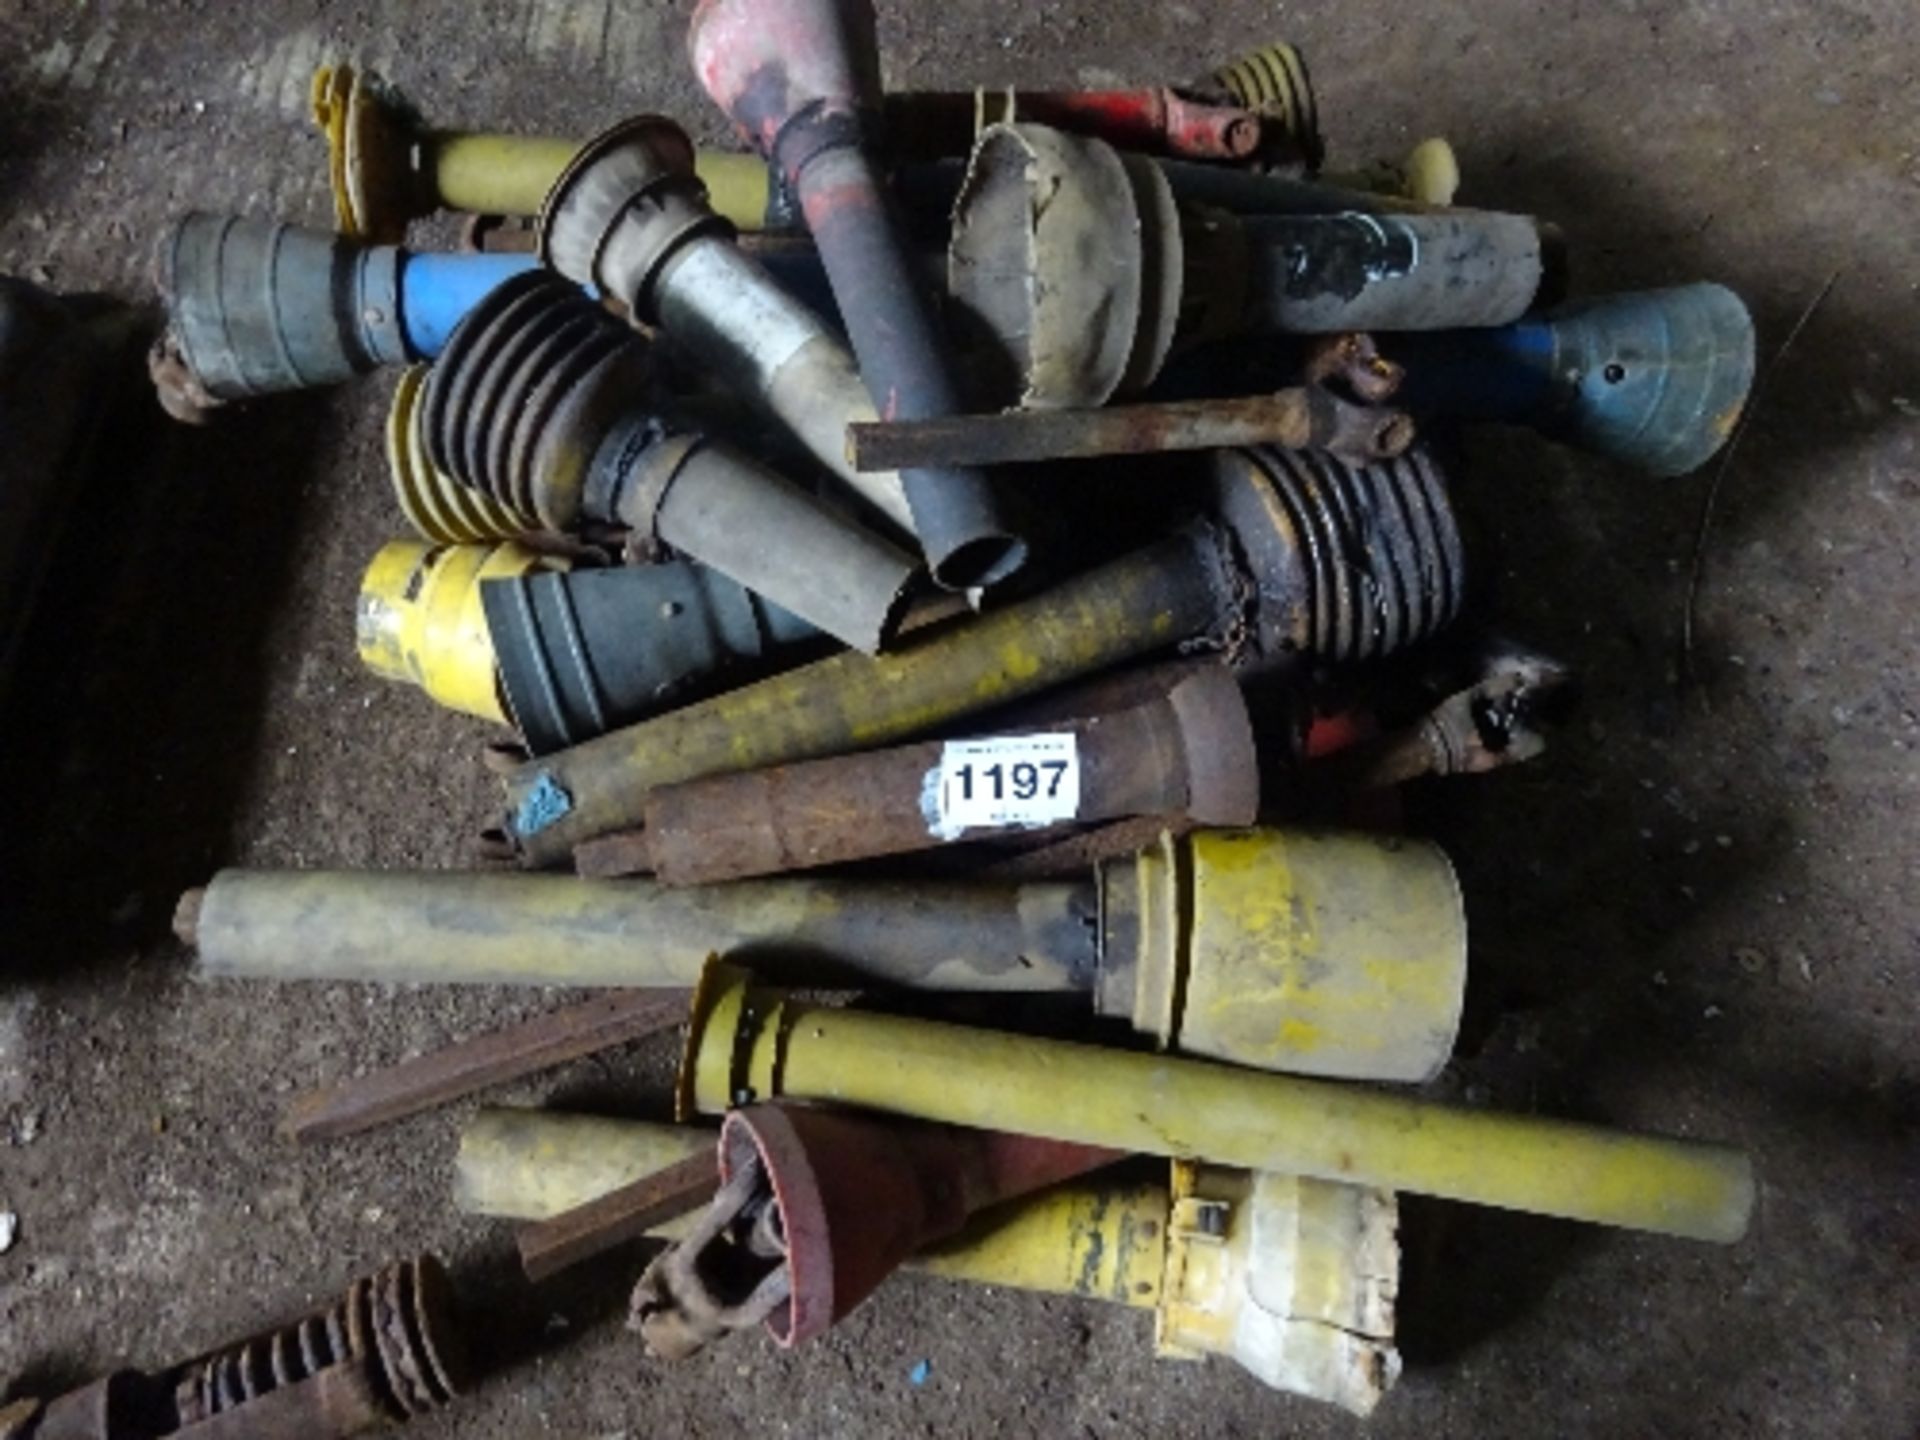 Quantity of assorted PTO shafts and guards